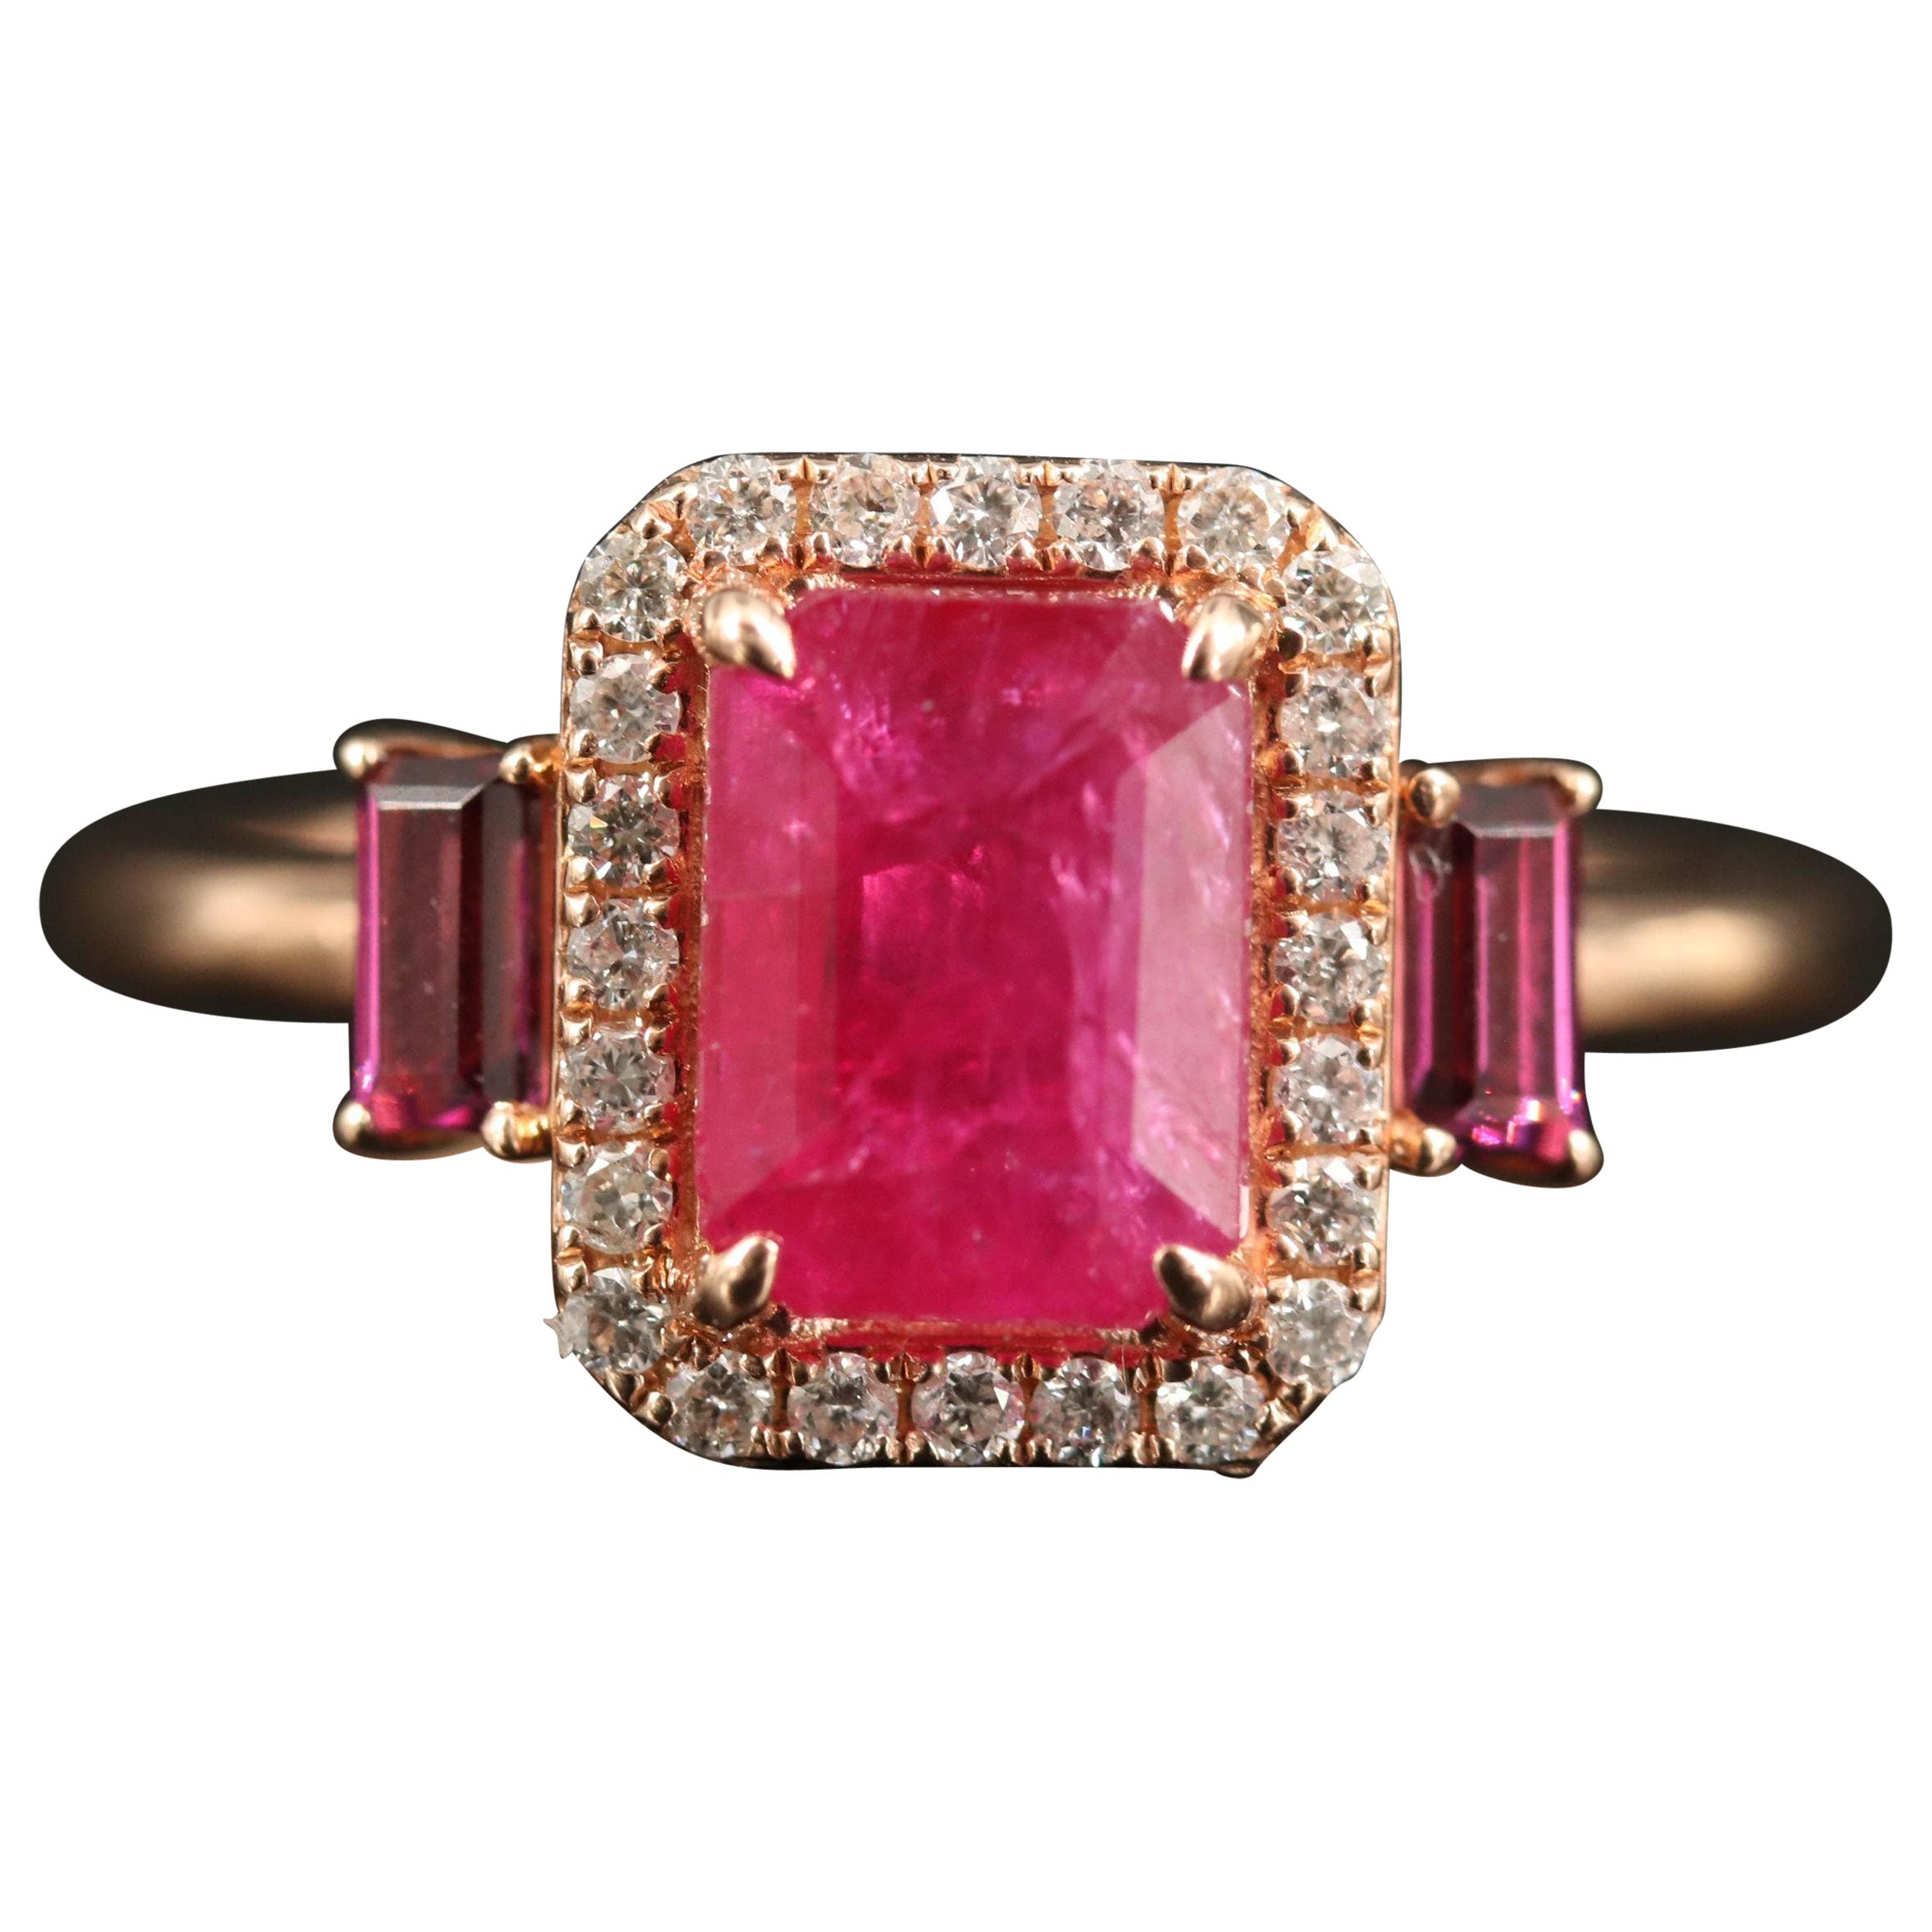 For Sale:  18K Gold 1.72 Carat Natural Ruby Diamond Antique Art Deco Style Engagement Ring